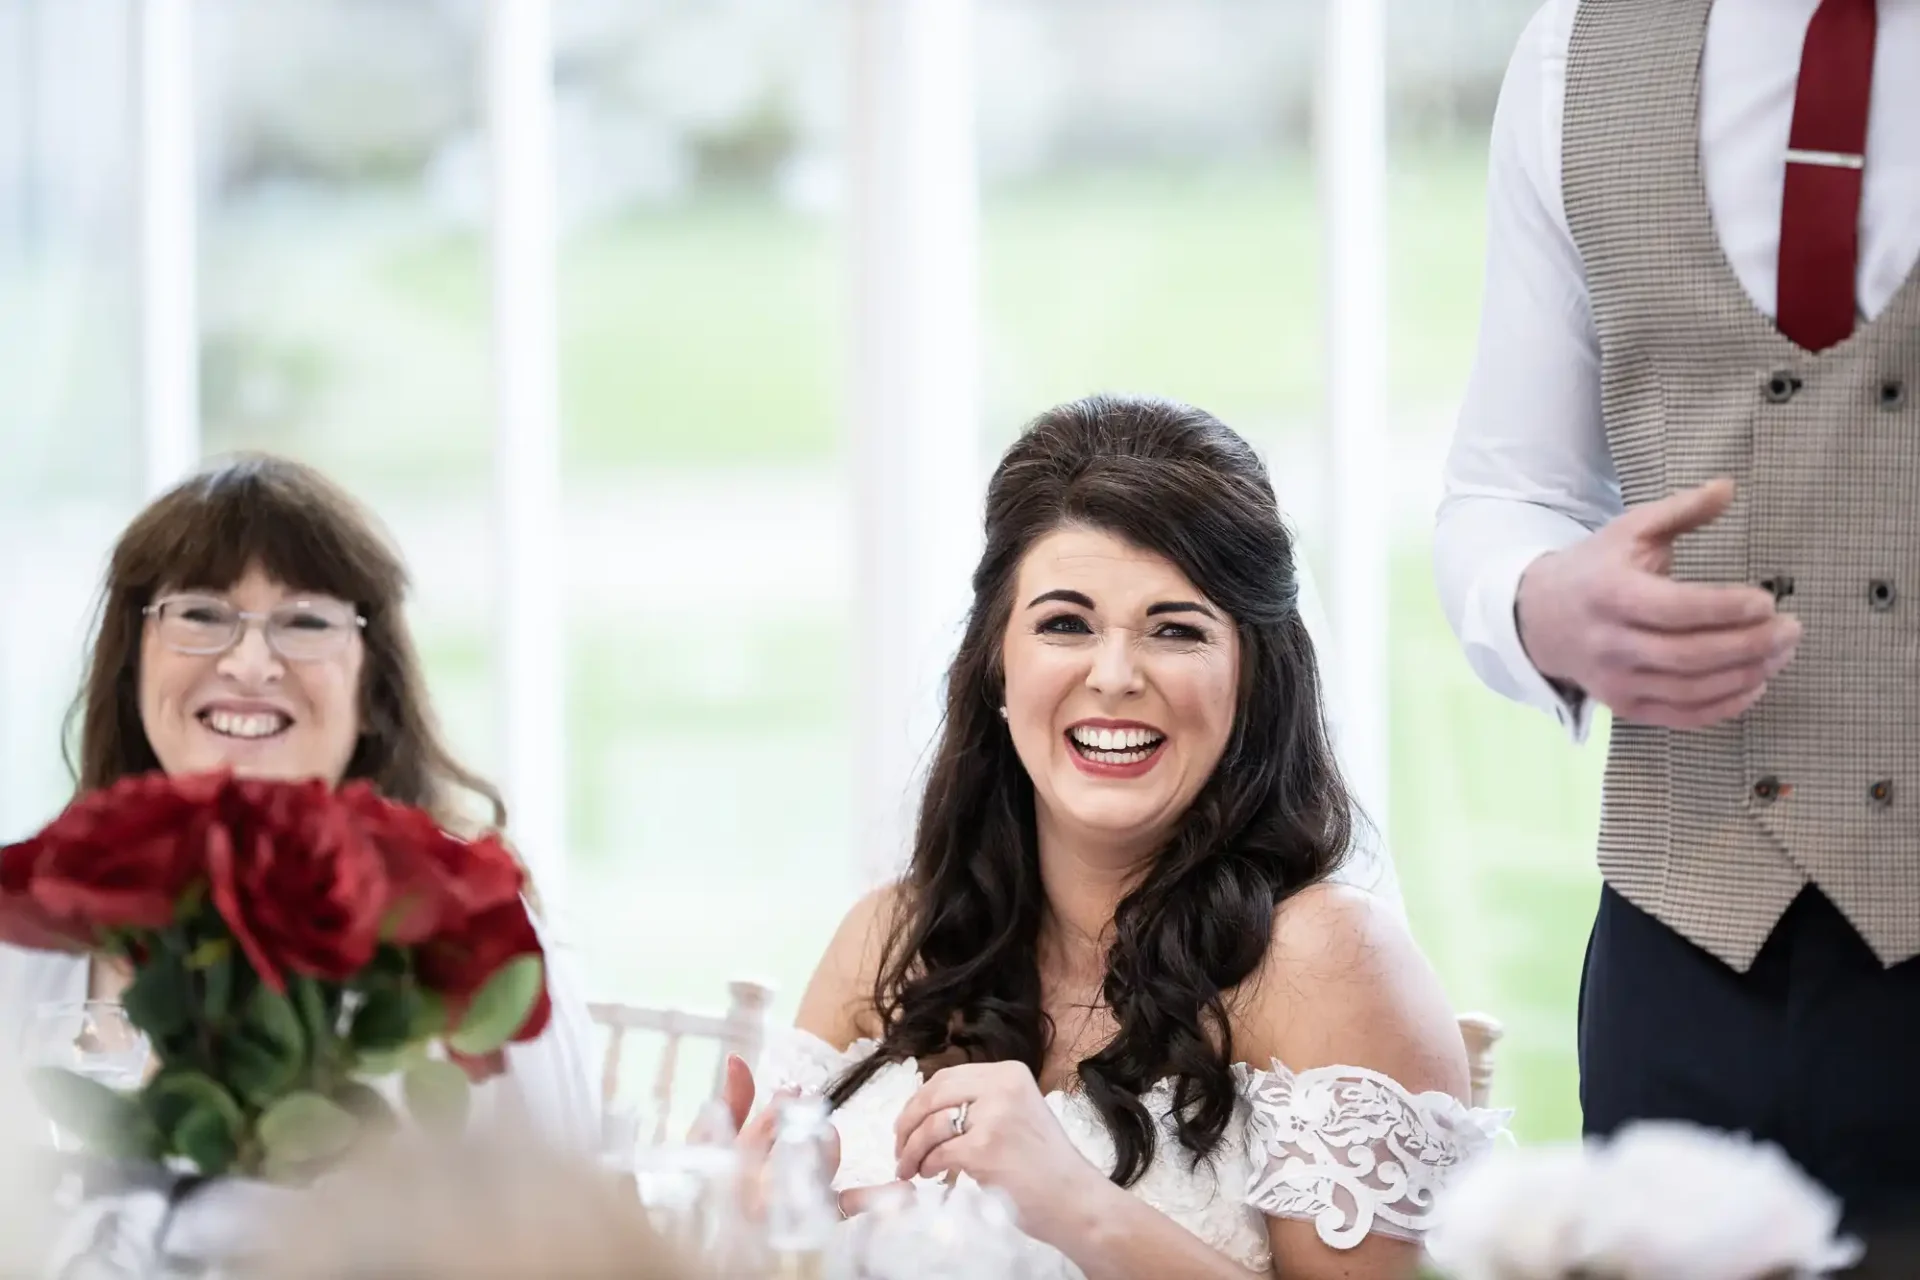 A bride laughing joyfully at a wedding reception table, with a woman smiling beside her and a man gesturing, in a room with bright windows.